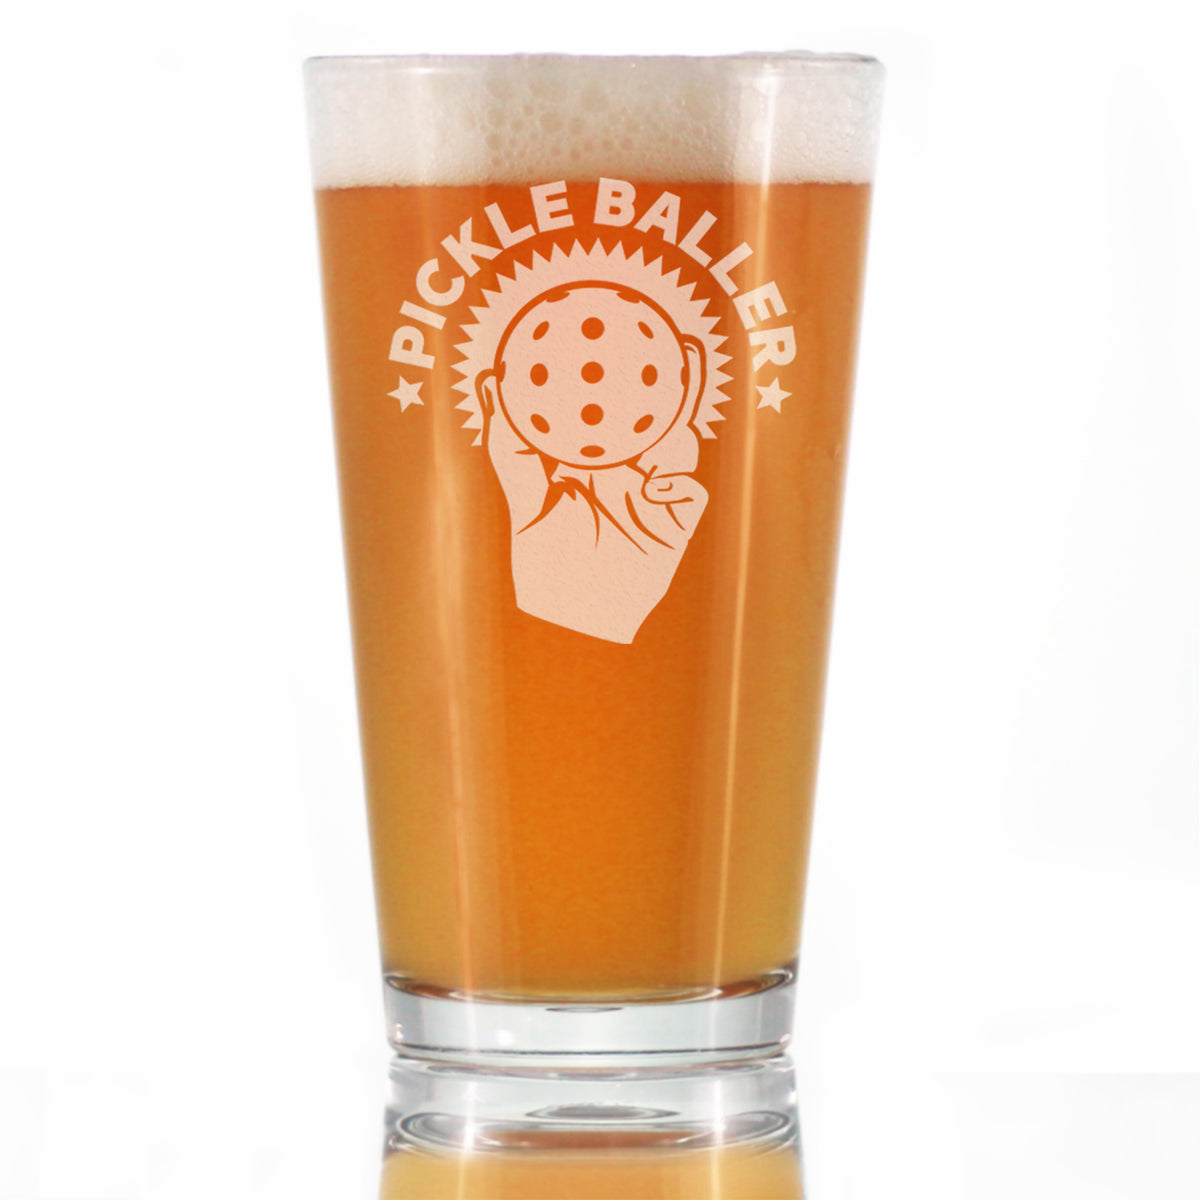 Pickleballer - Funny Pickleball Themed Decor and Gifts - 16 Ounce Pint Glass